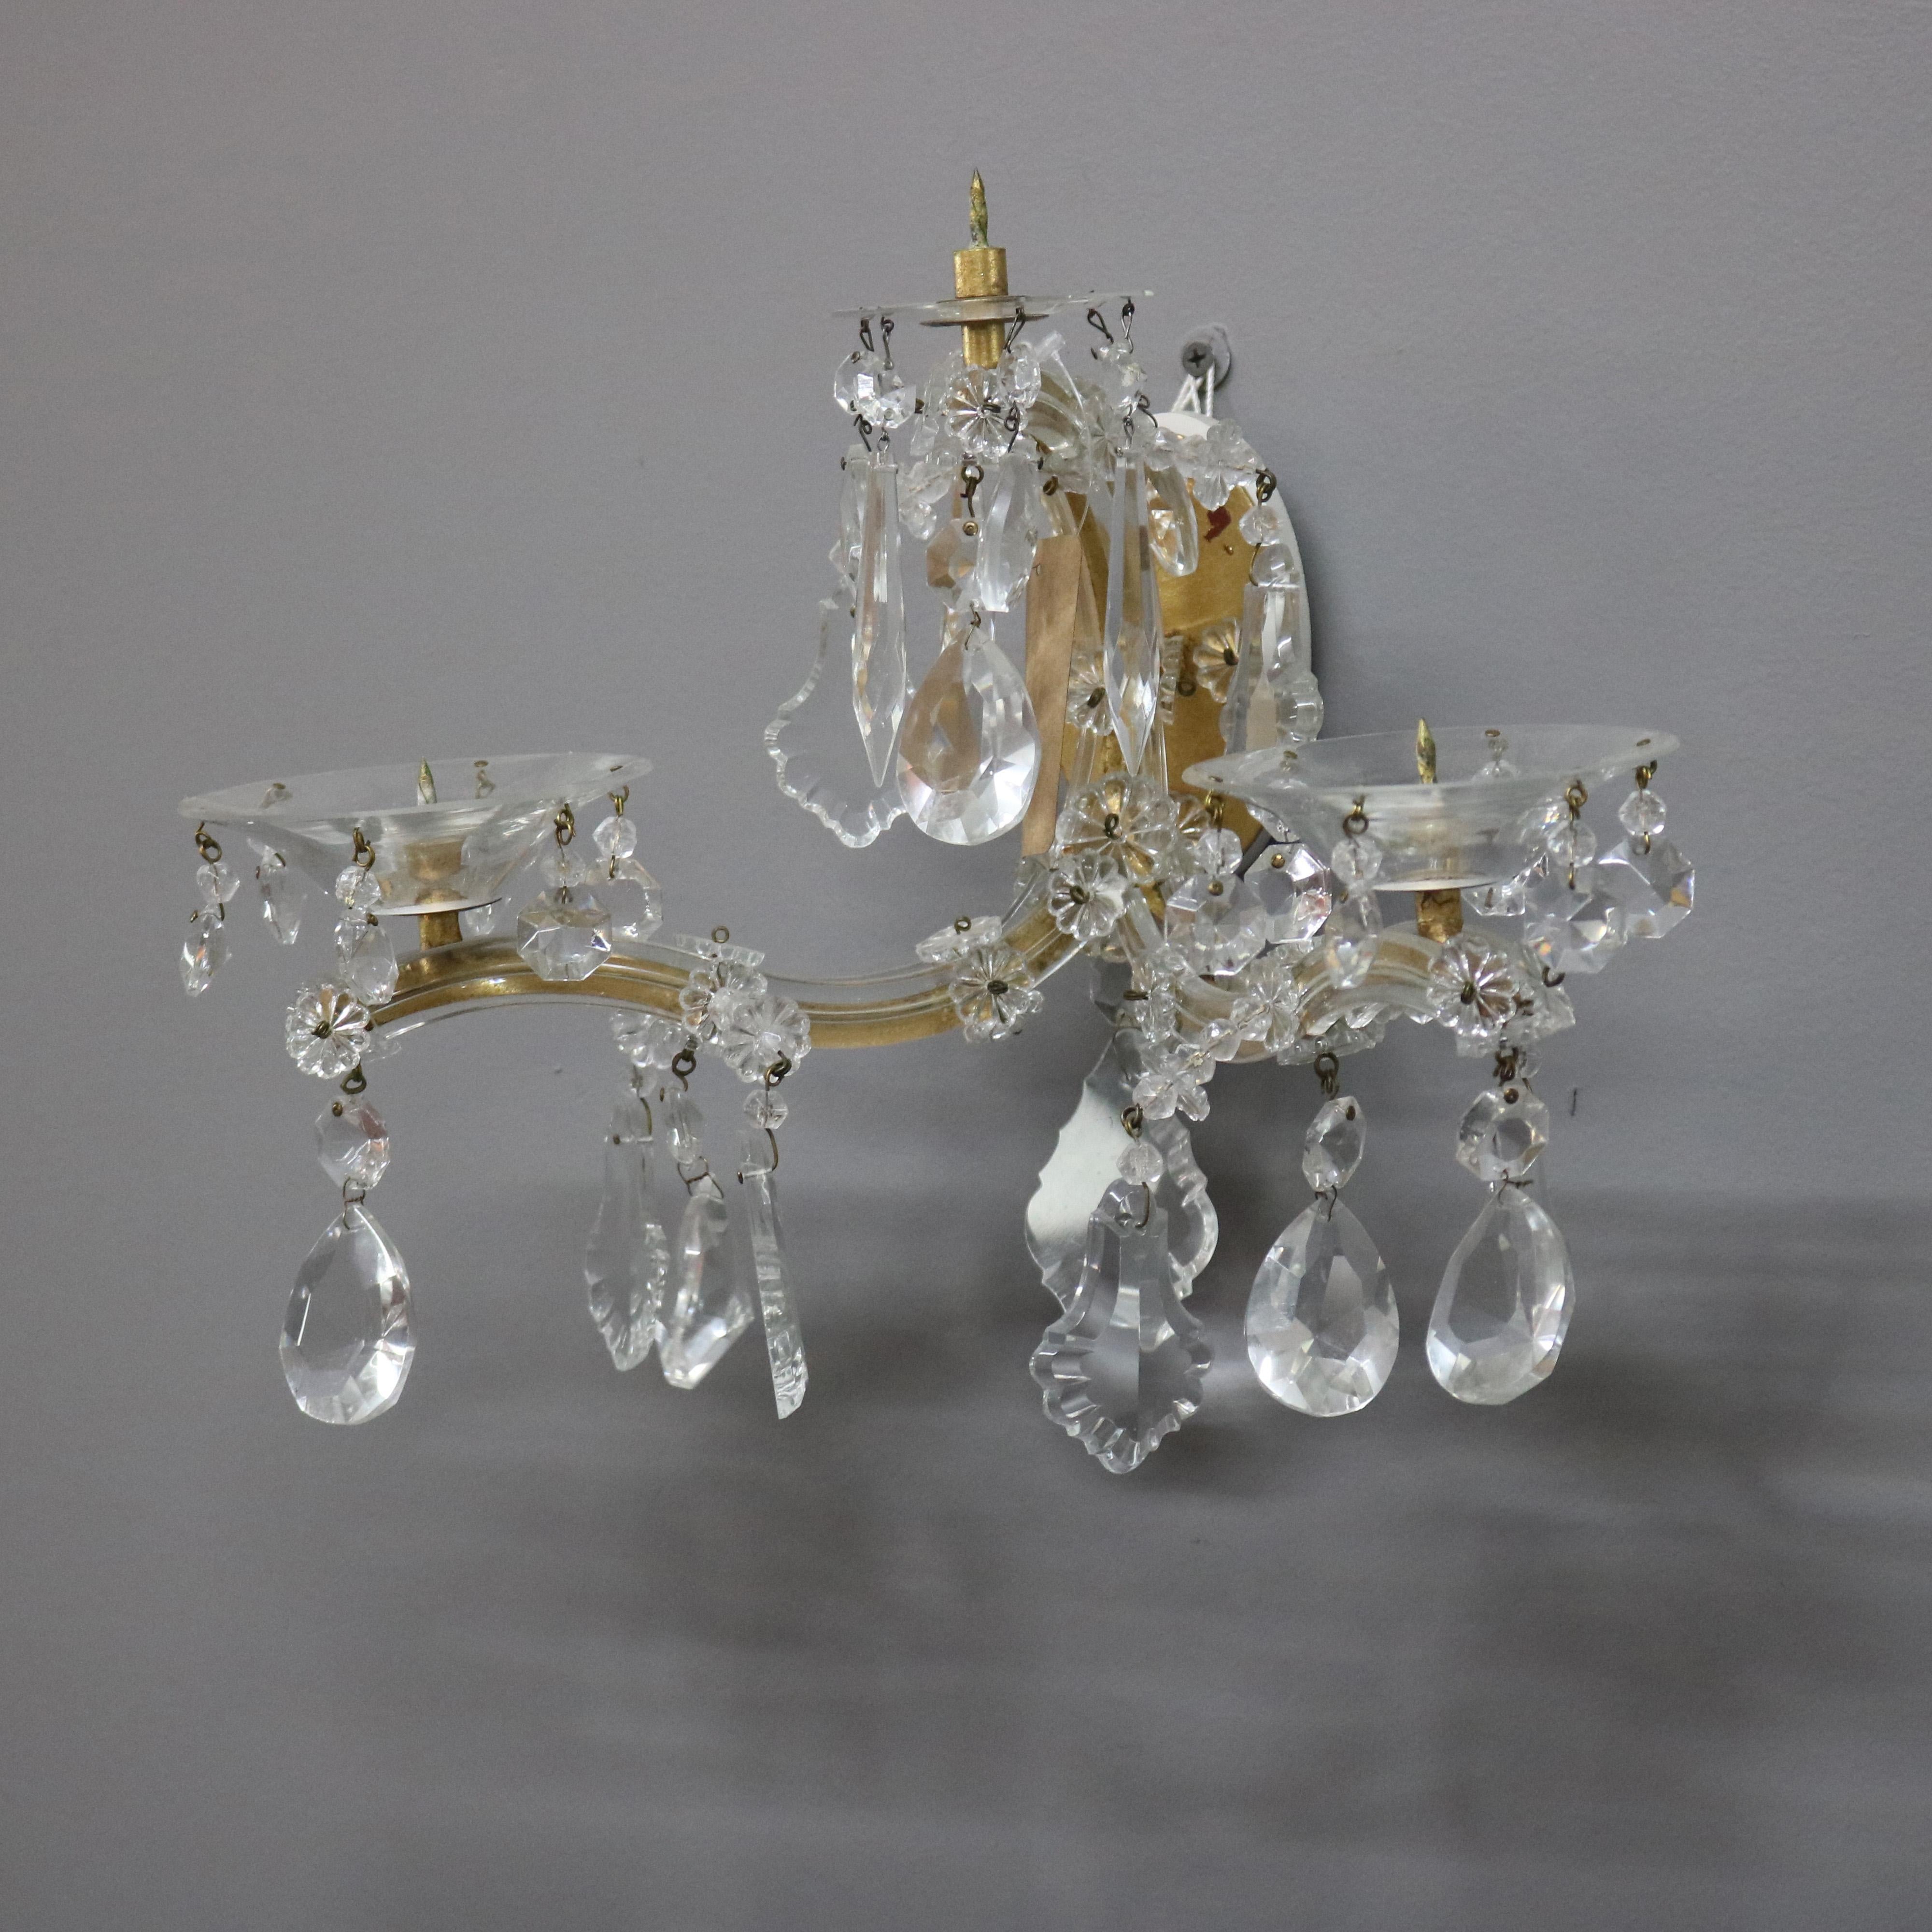 A vintage pair of French wall sconces offer brass frame with double c-scroll arms terminating in candle spires, cut crystal highlights throughout, circa 1930.

***DELIVERY NOTICE – Due to COVID-19 we are employing NO-CONTACT PRACTICES in the